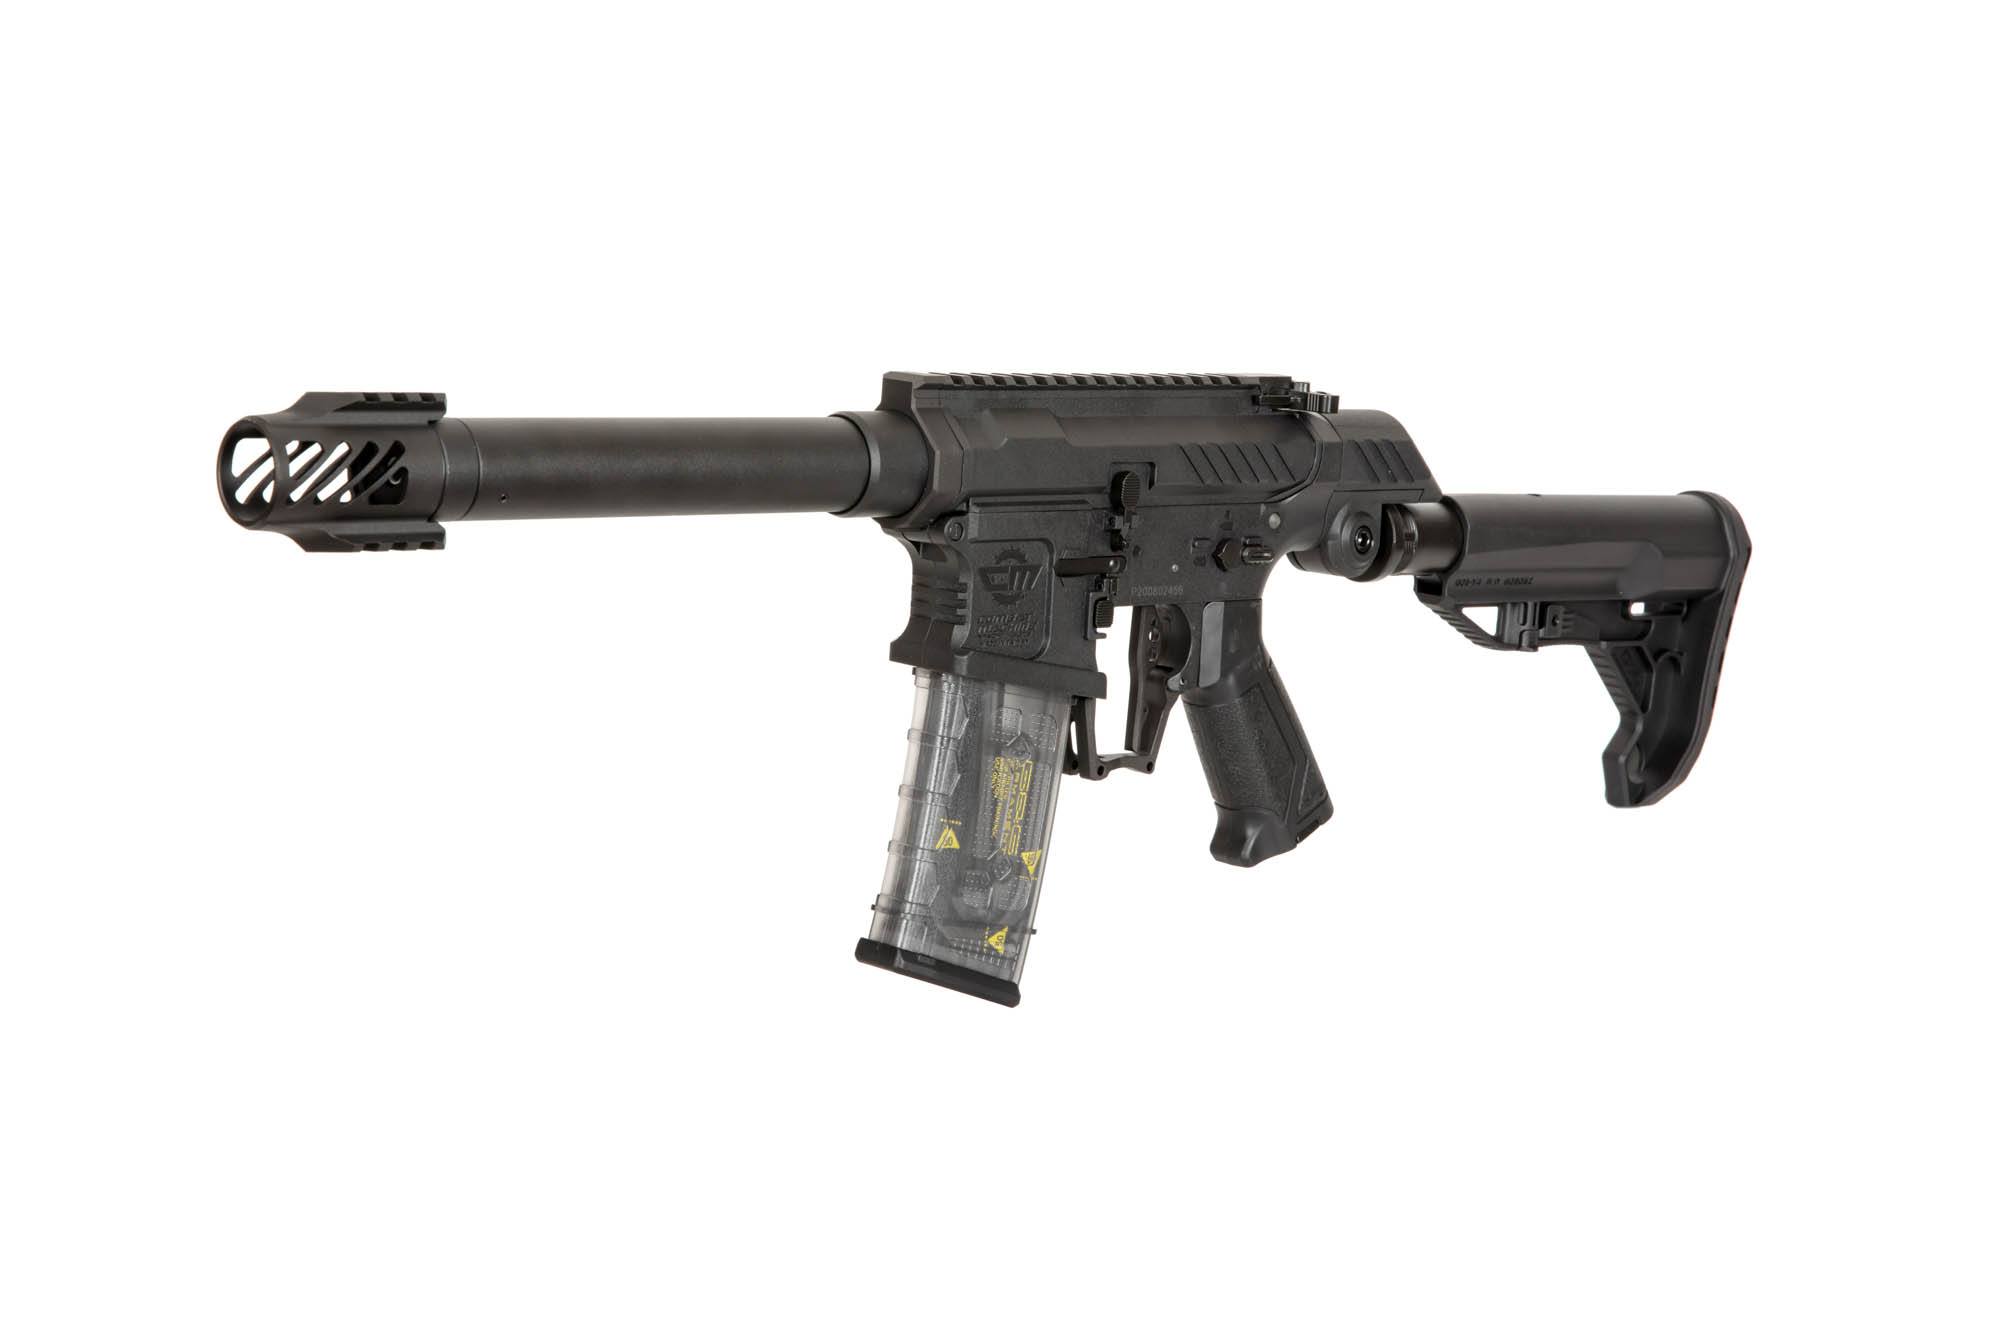 SSG-1 Speedsoft Rifle by G&G on Airsoft Mania Europe